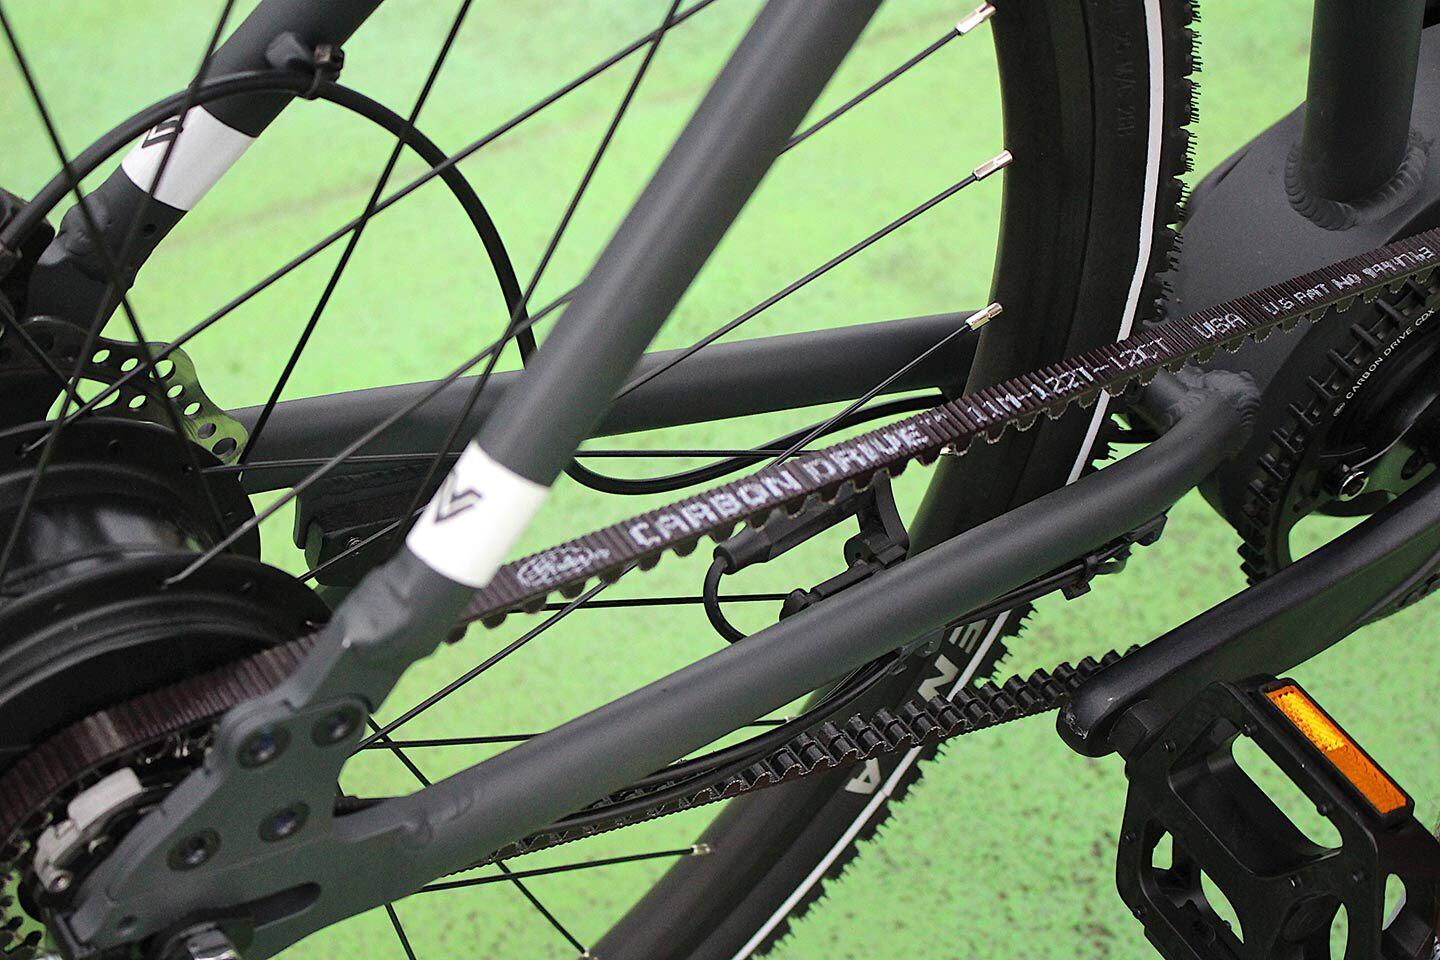 Ebikes have seen a proliferation of belt drives.